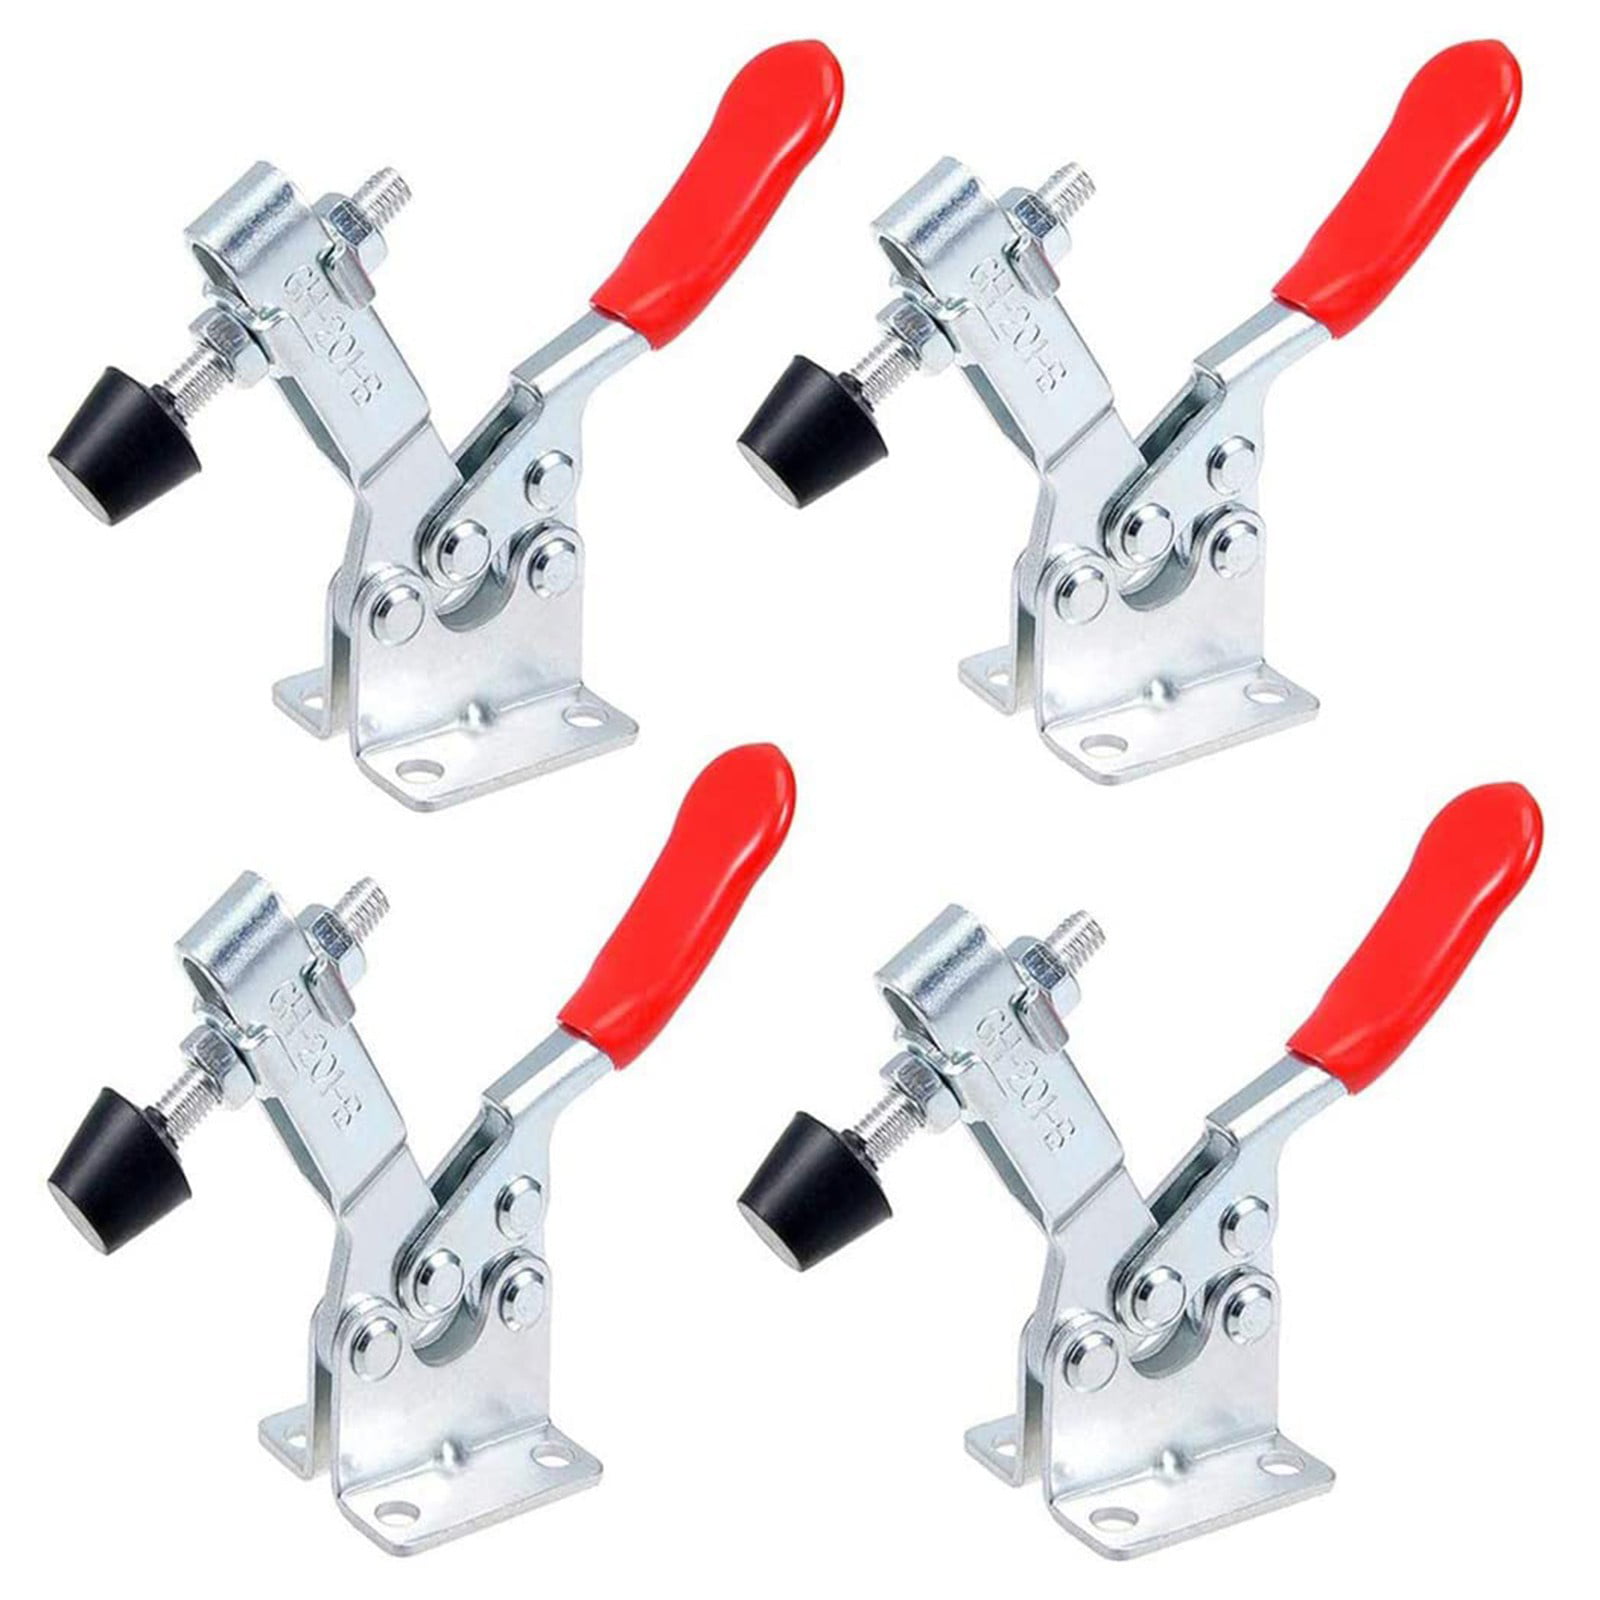 4pcs Easy Use Metal Horizontal Quick Release Hand Tool Hold-down Toggle Clamps G 